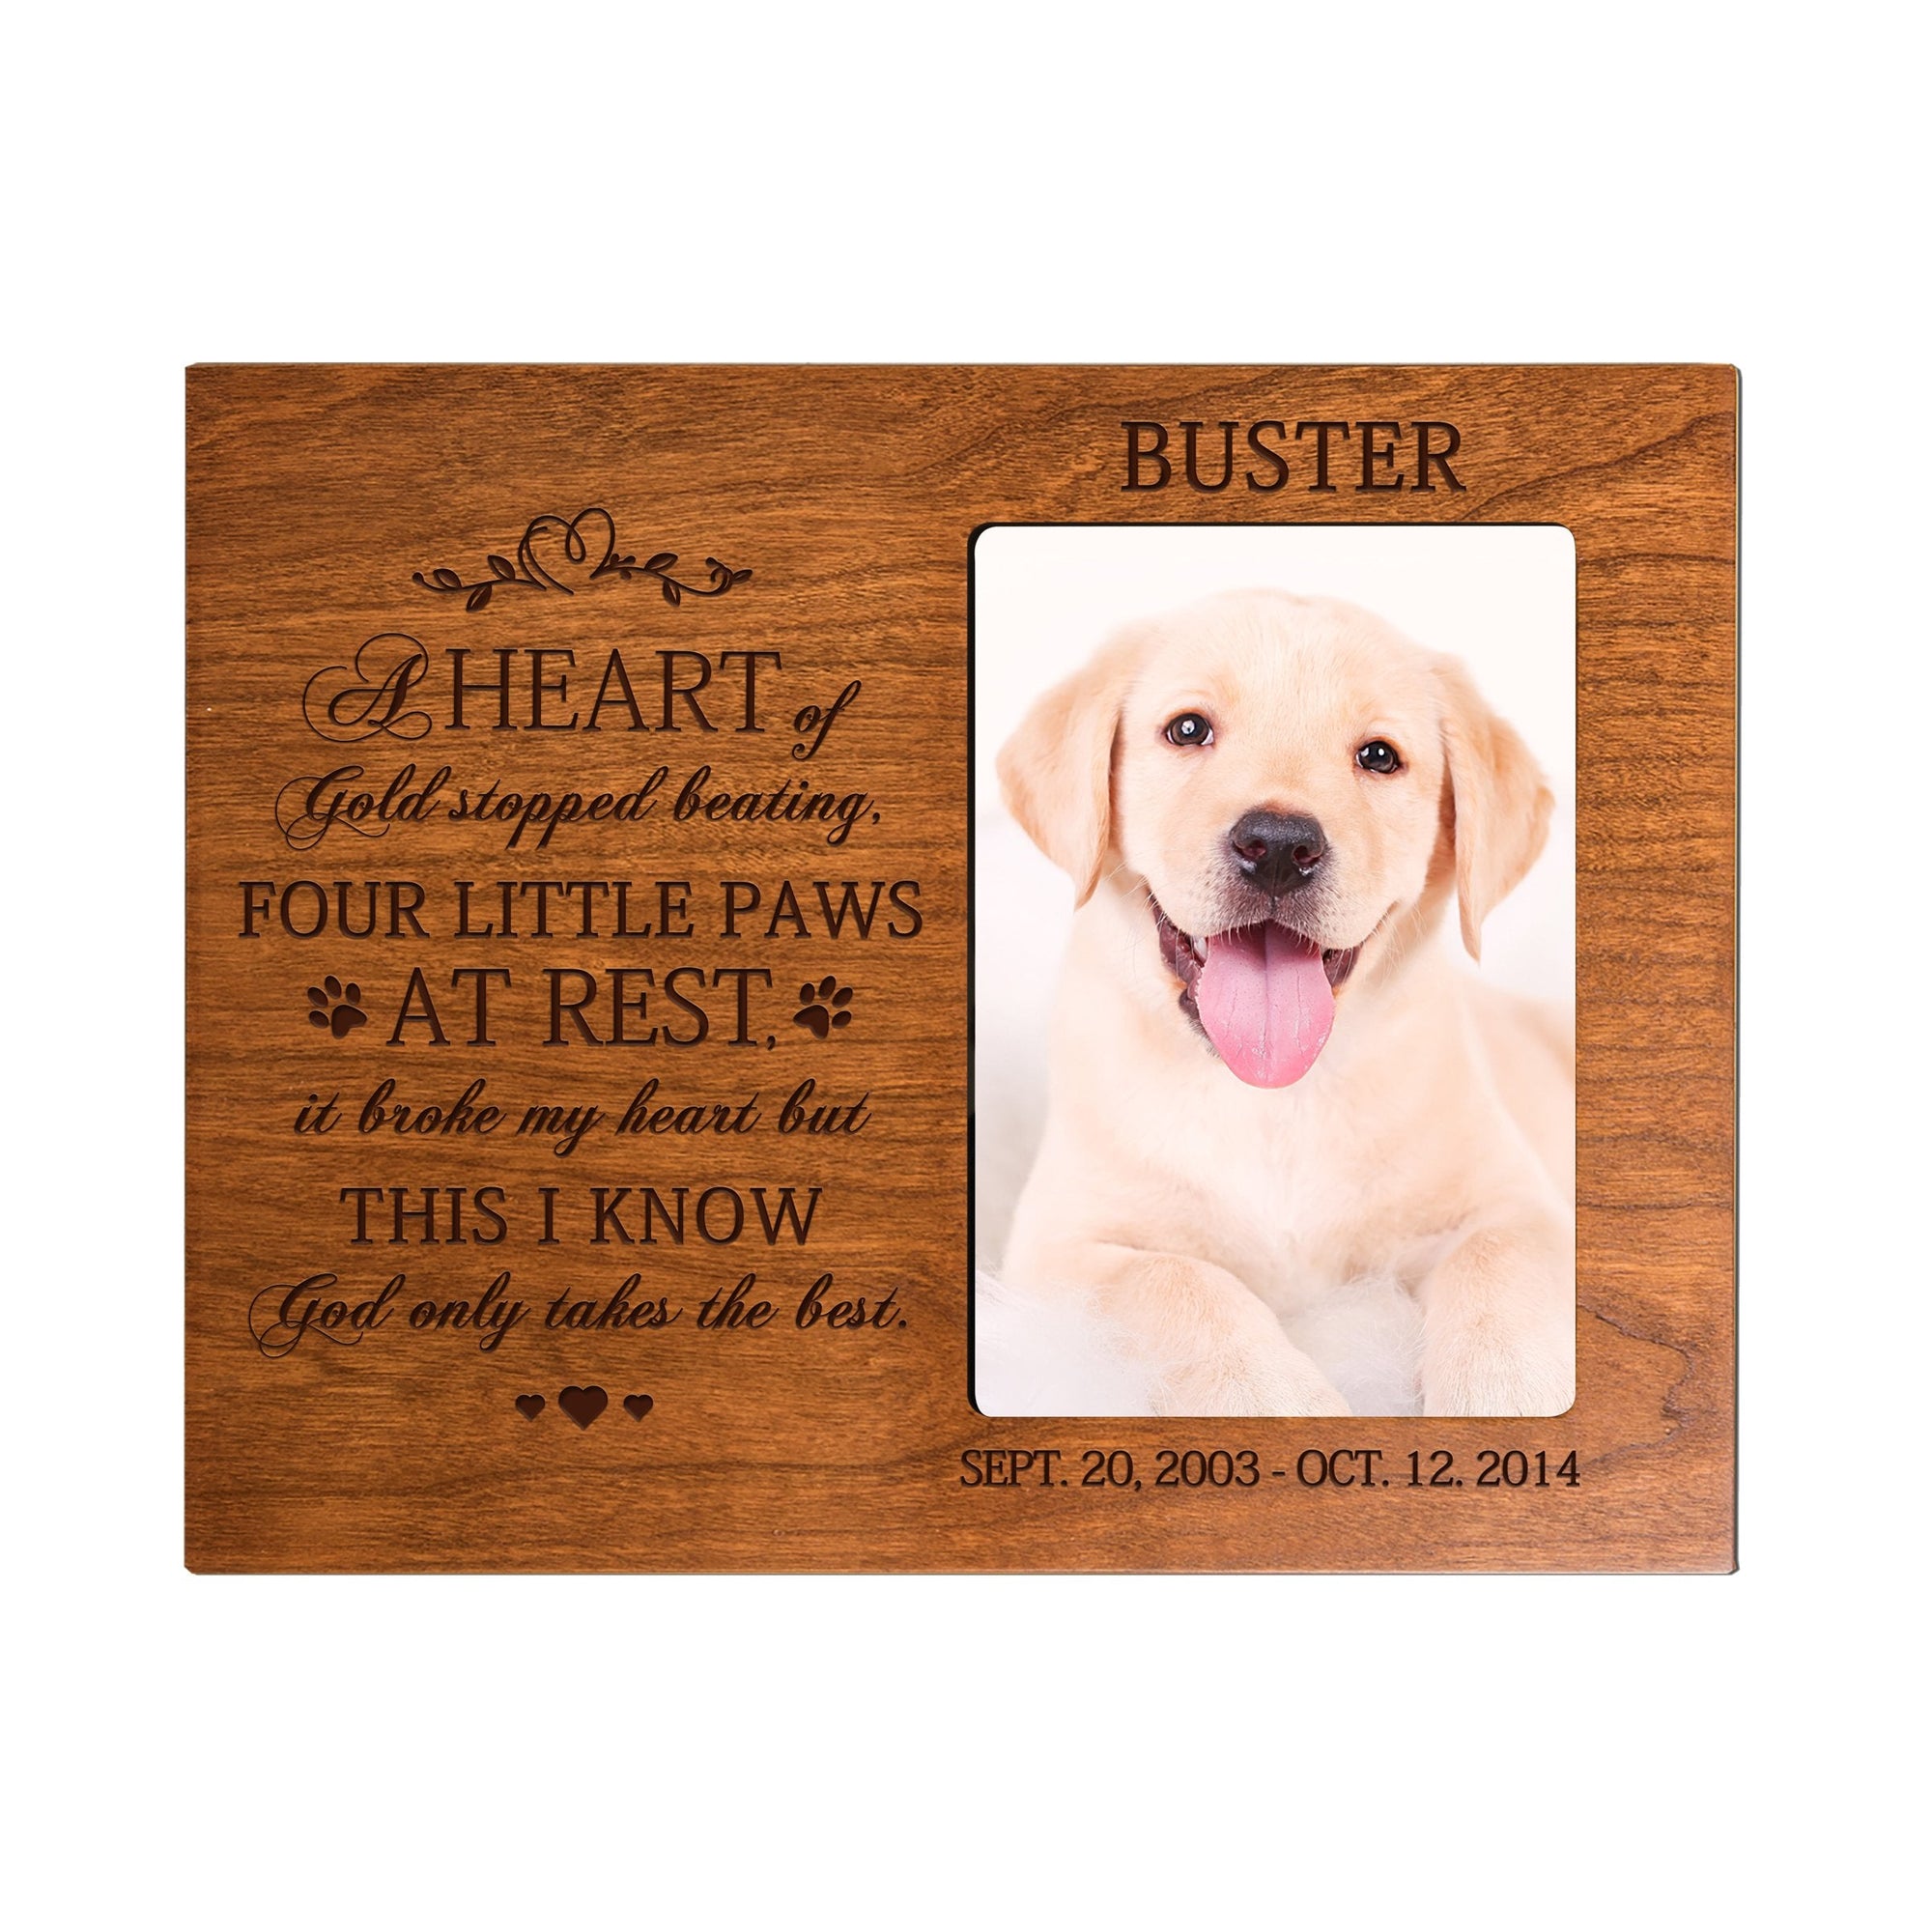 8x10 Cherry Pet Memorial Picture Frame with the phrase "A Heart of Gold"